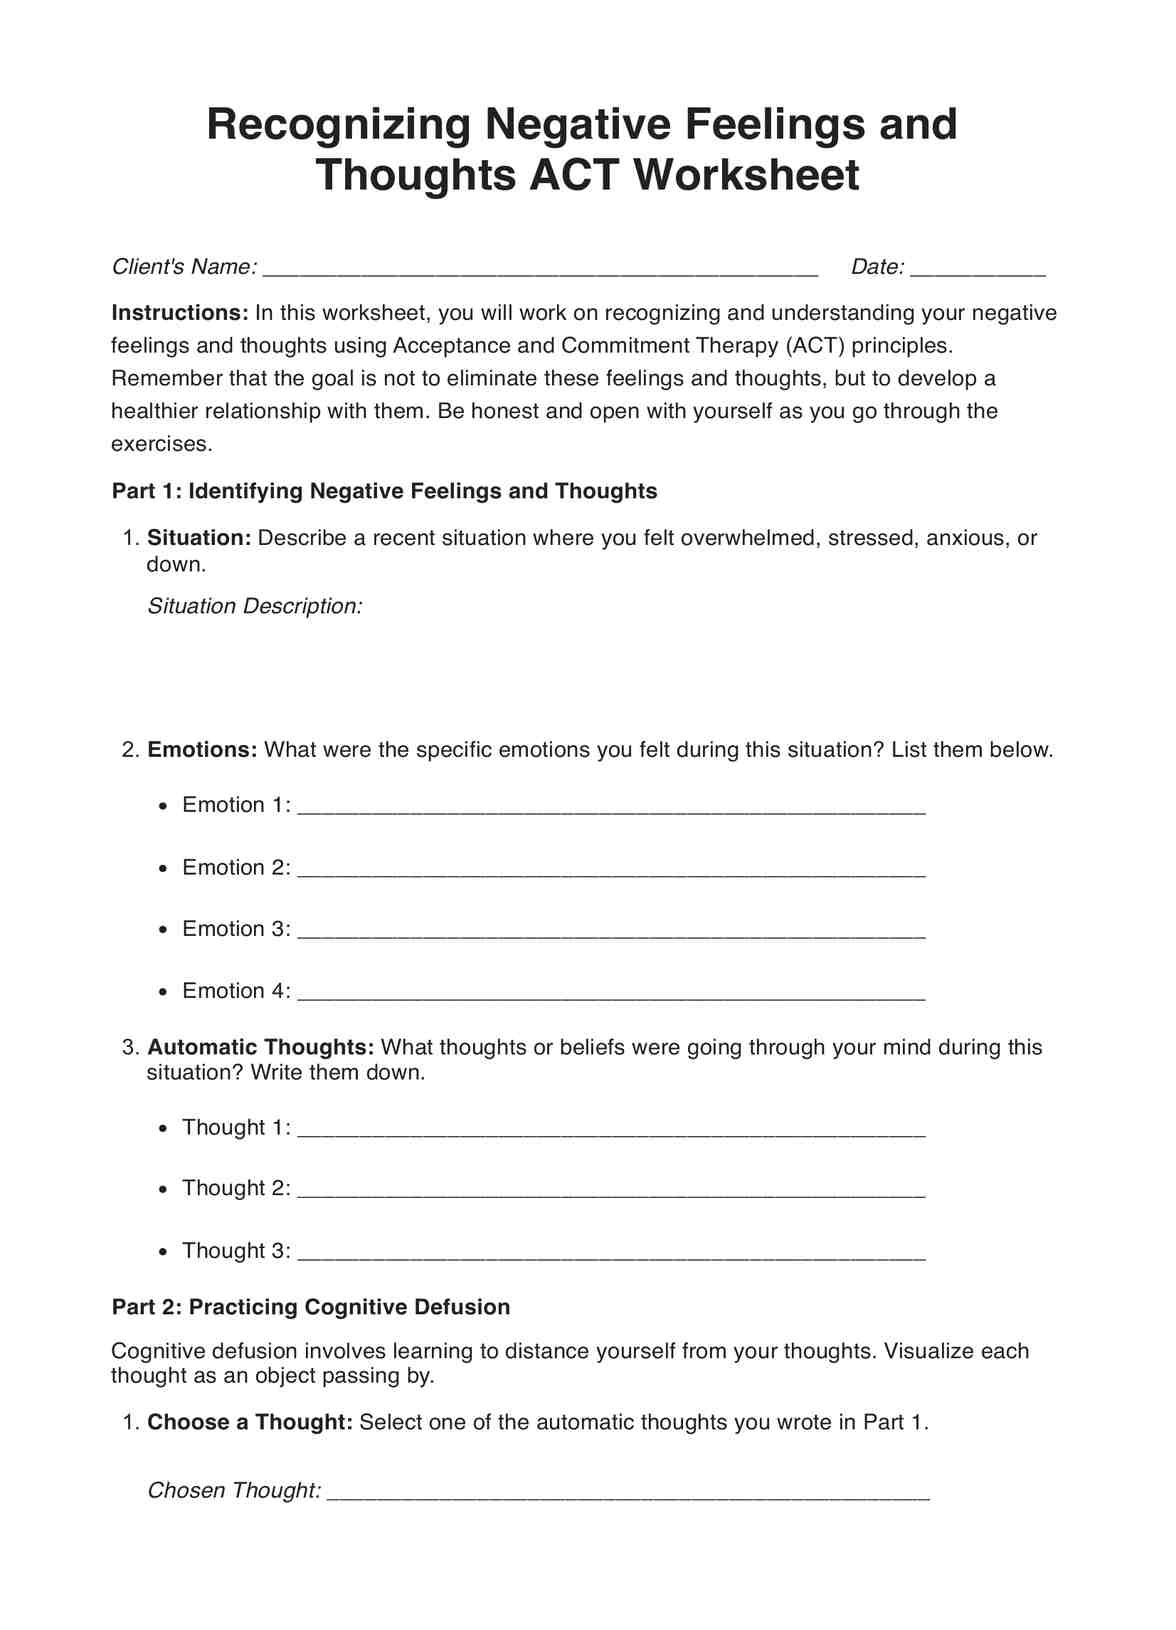 Recognizing Negative Feelings and Thoughts ACT Worksheet PDF Example